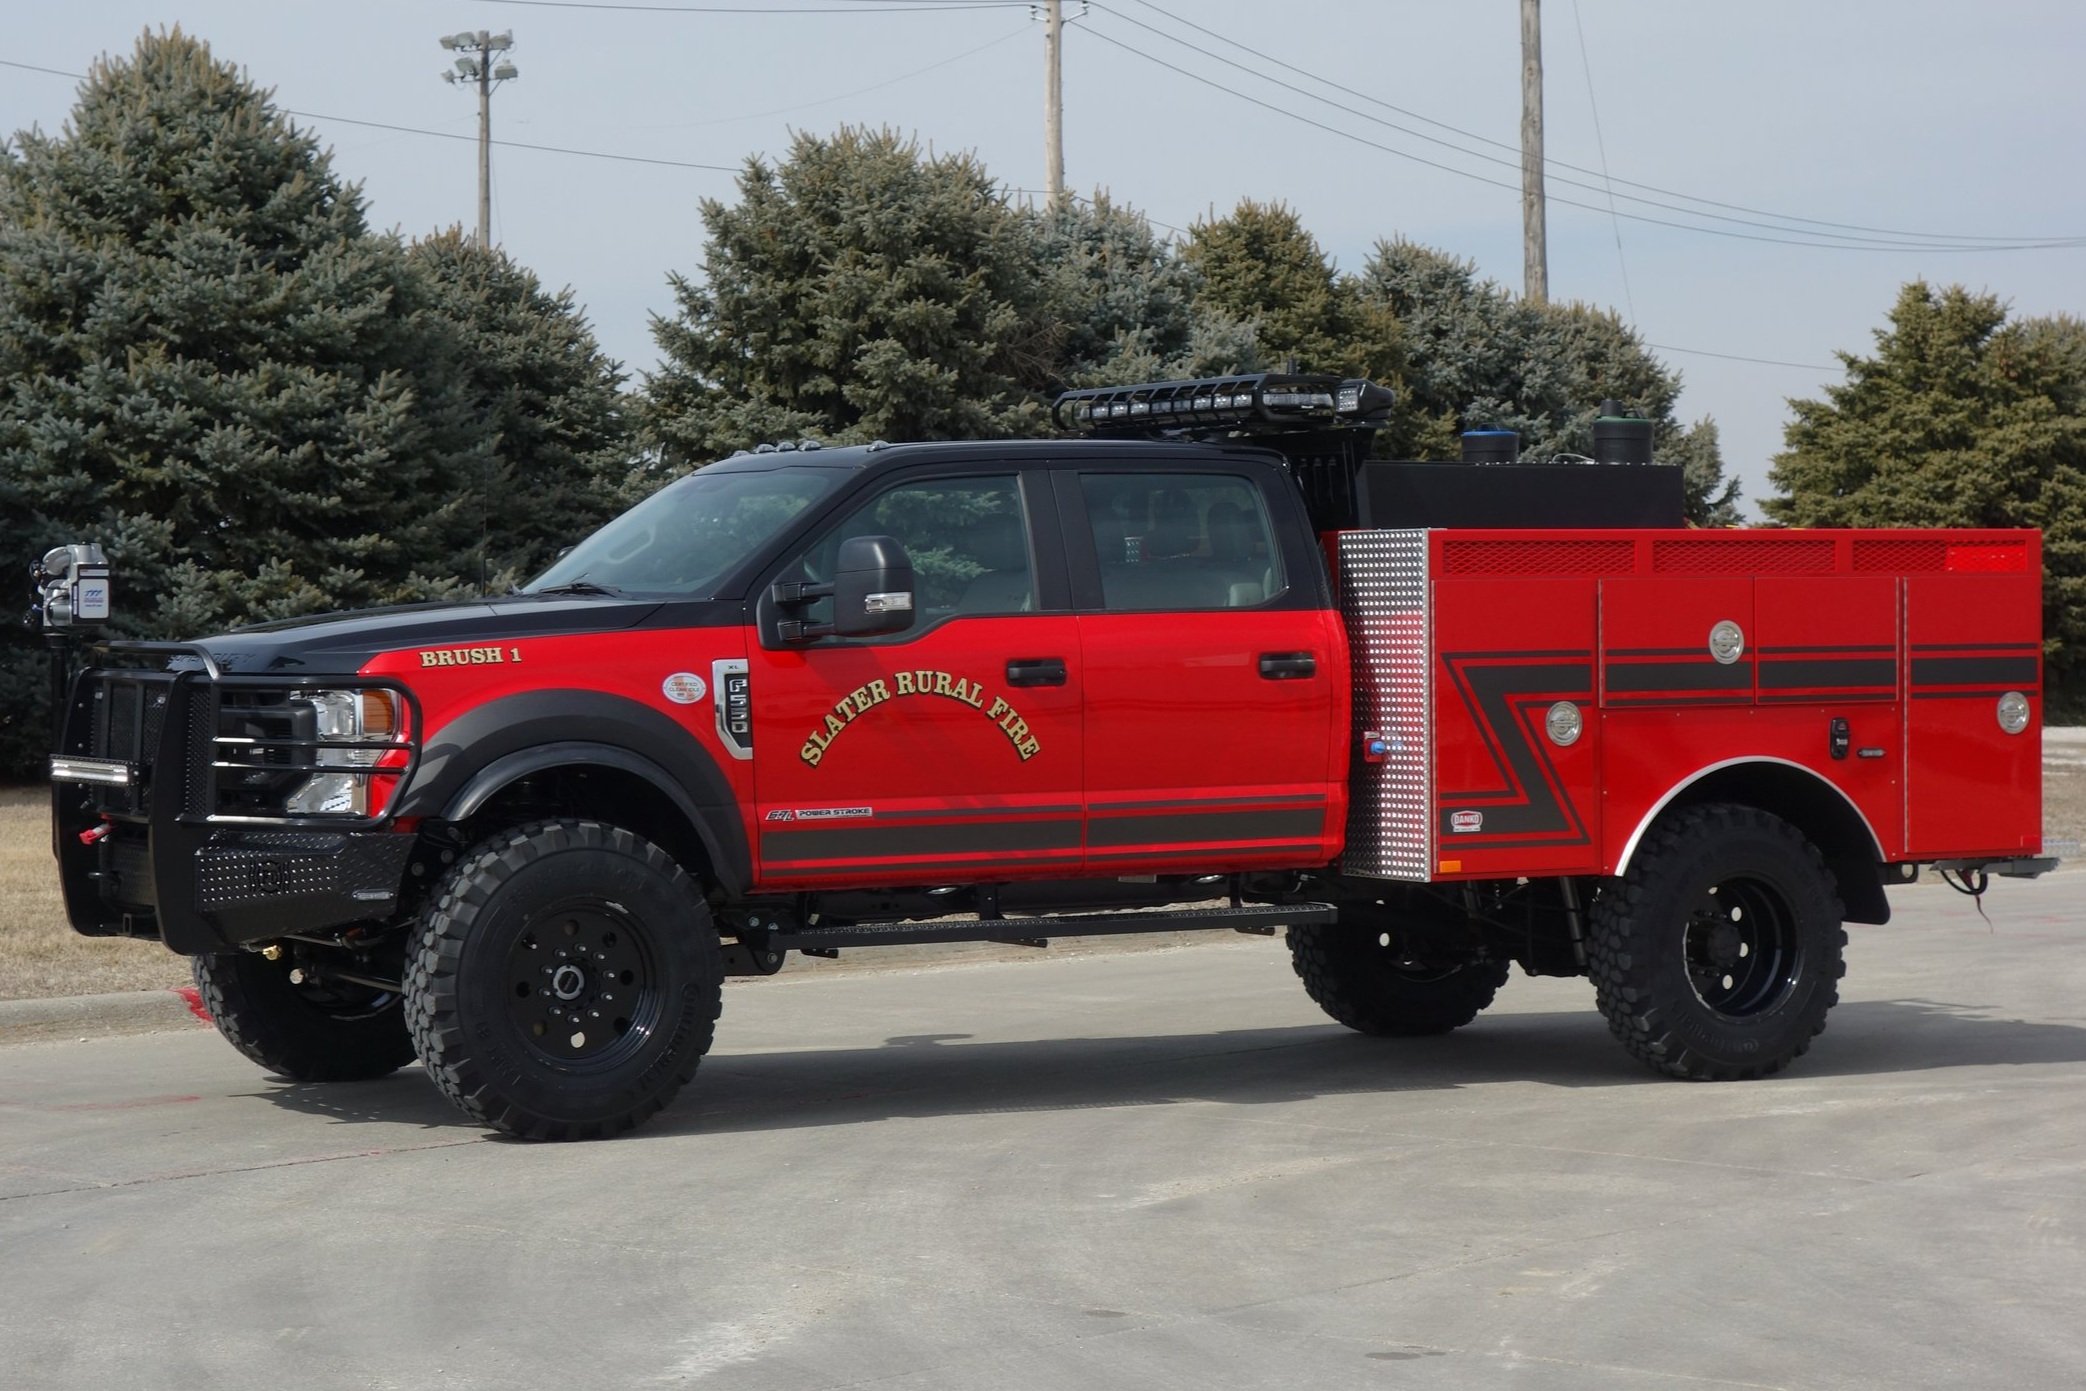 Autoworks Idaho - New Fire & Rescue Brush Truck - AutoWorks